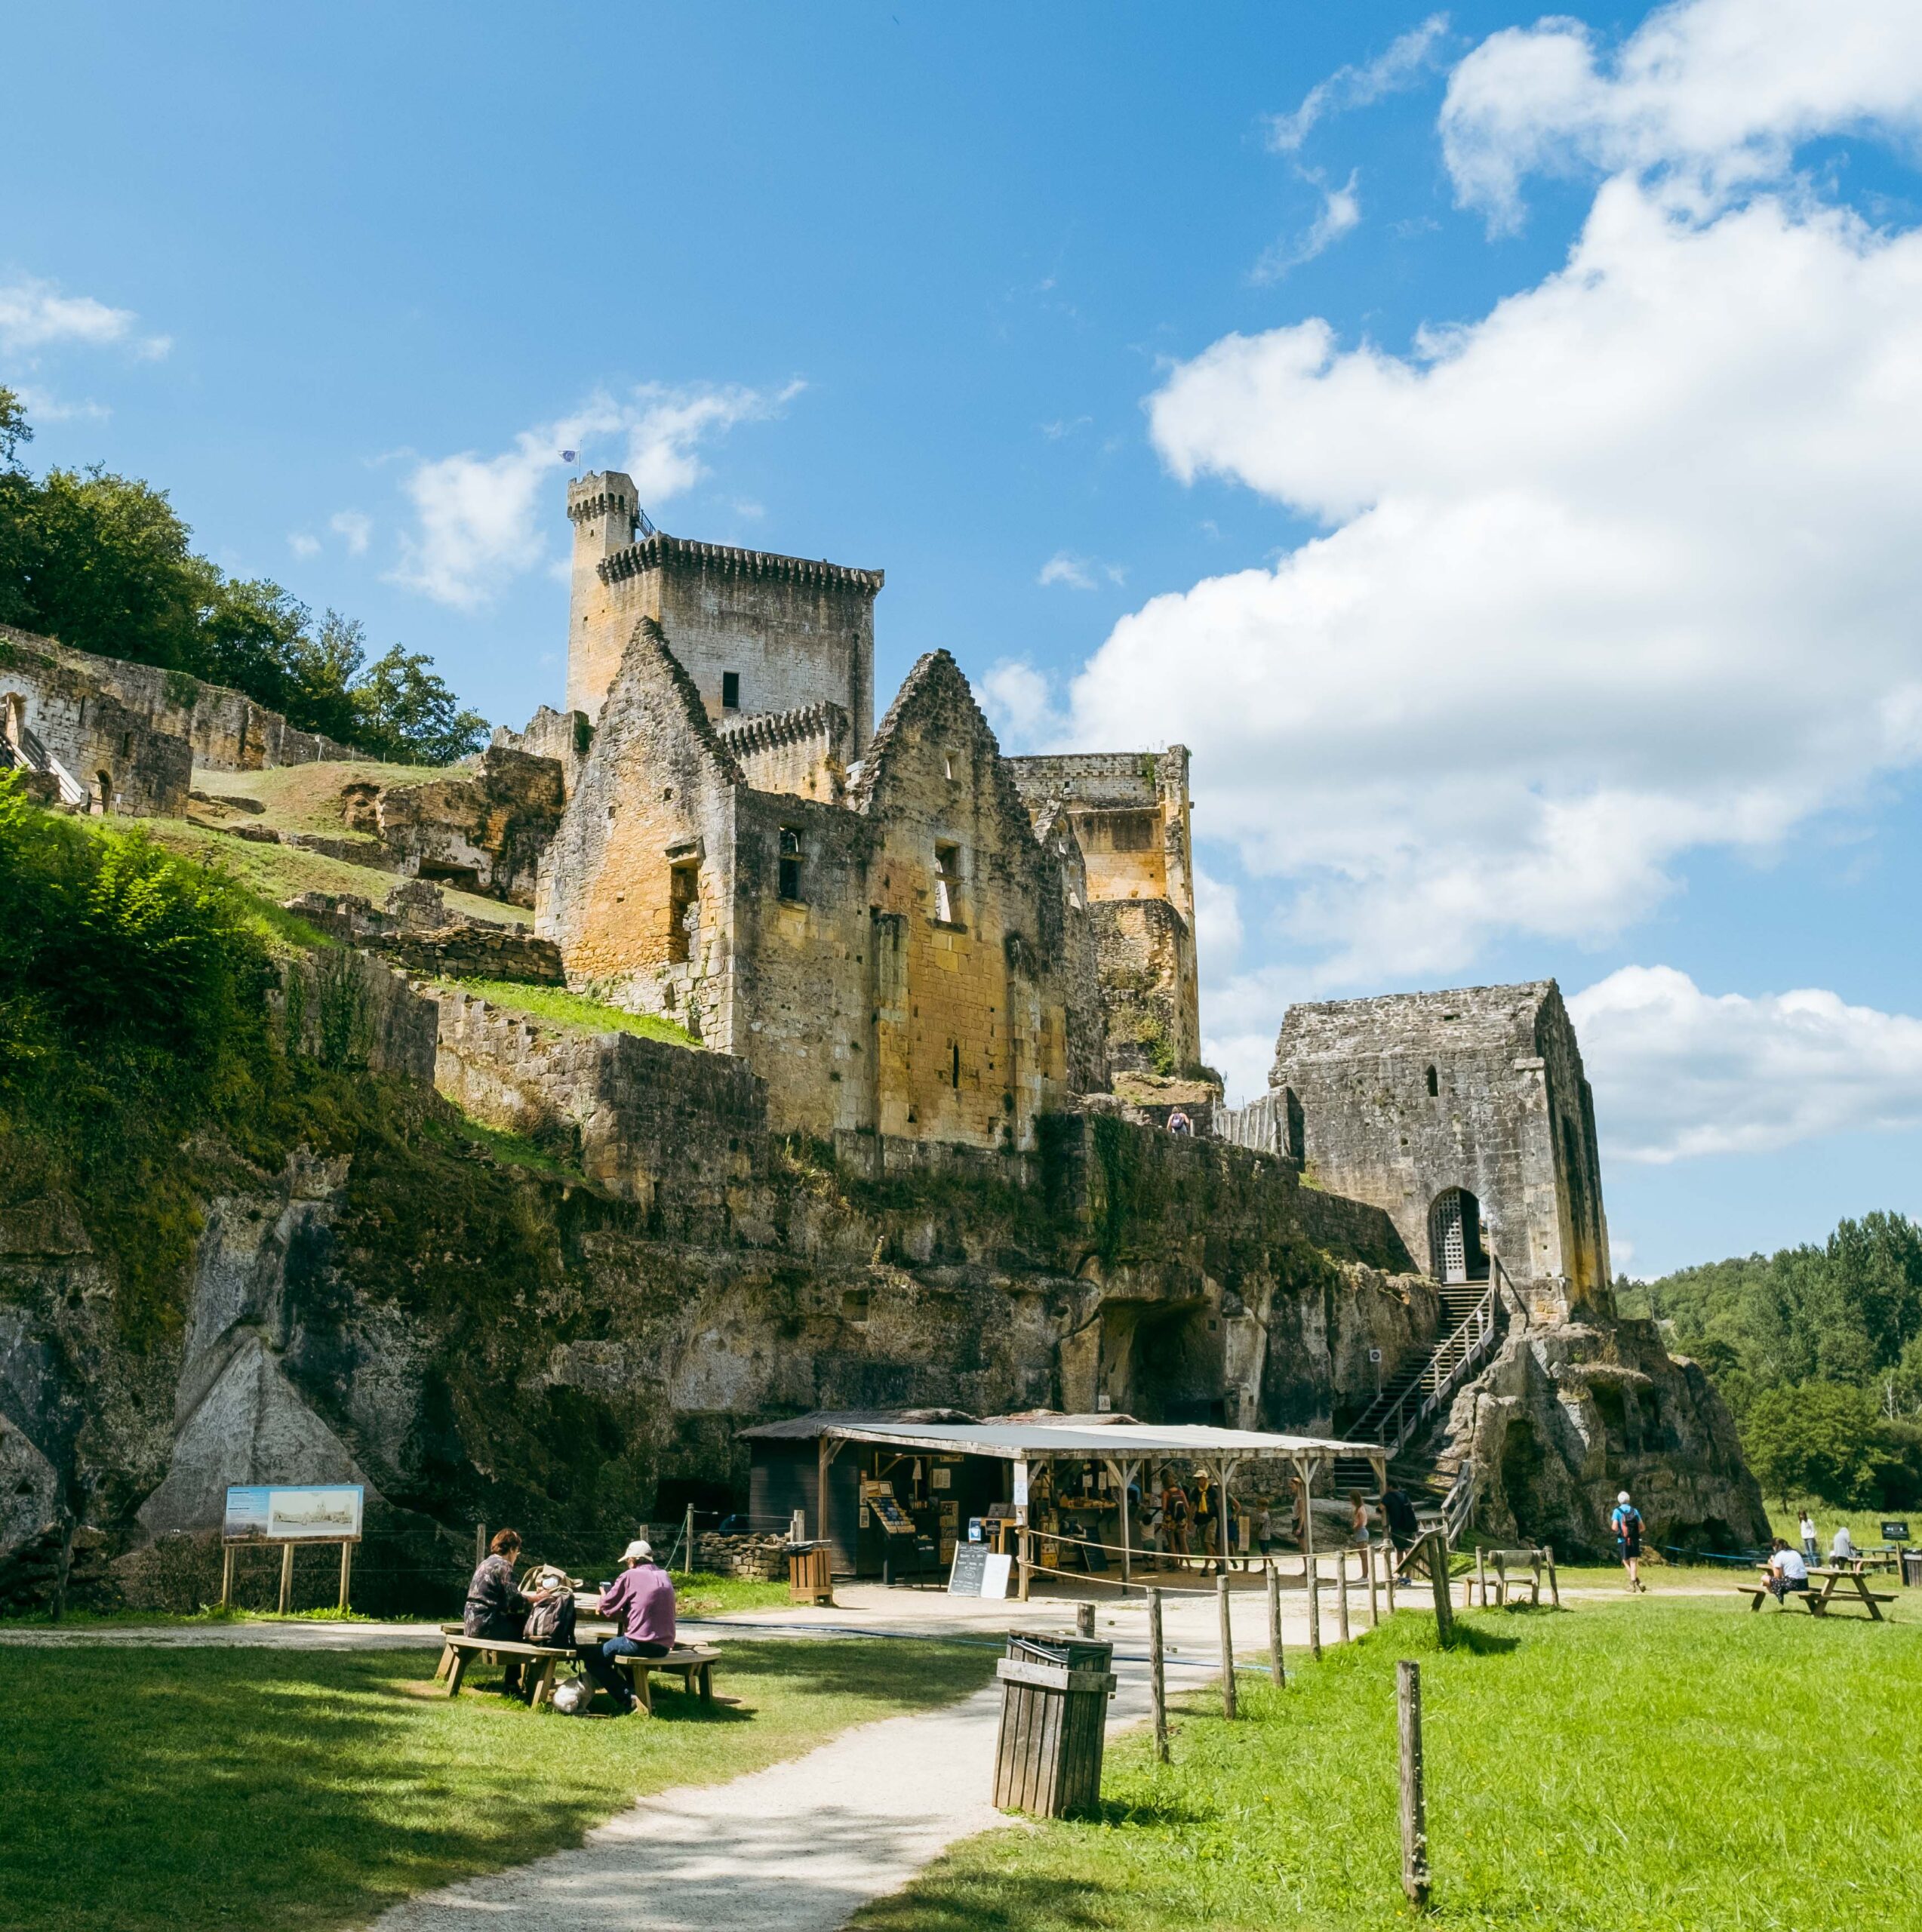 The Secrets of Sainte Madeleine: Escape to the chateau in this